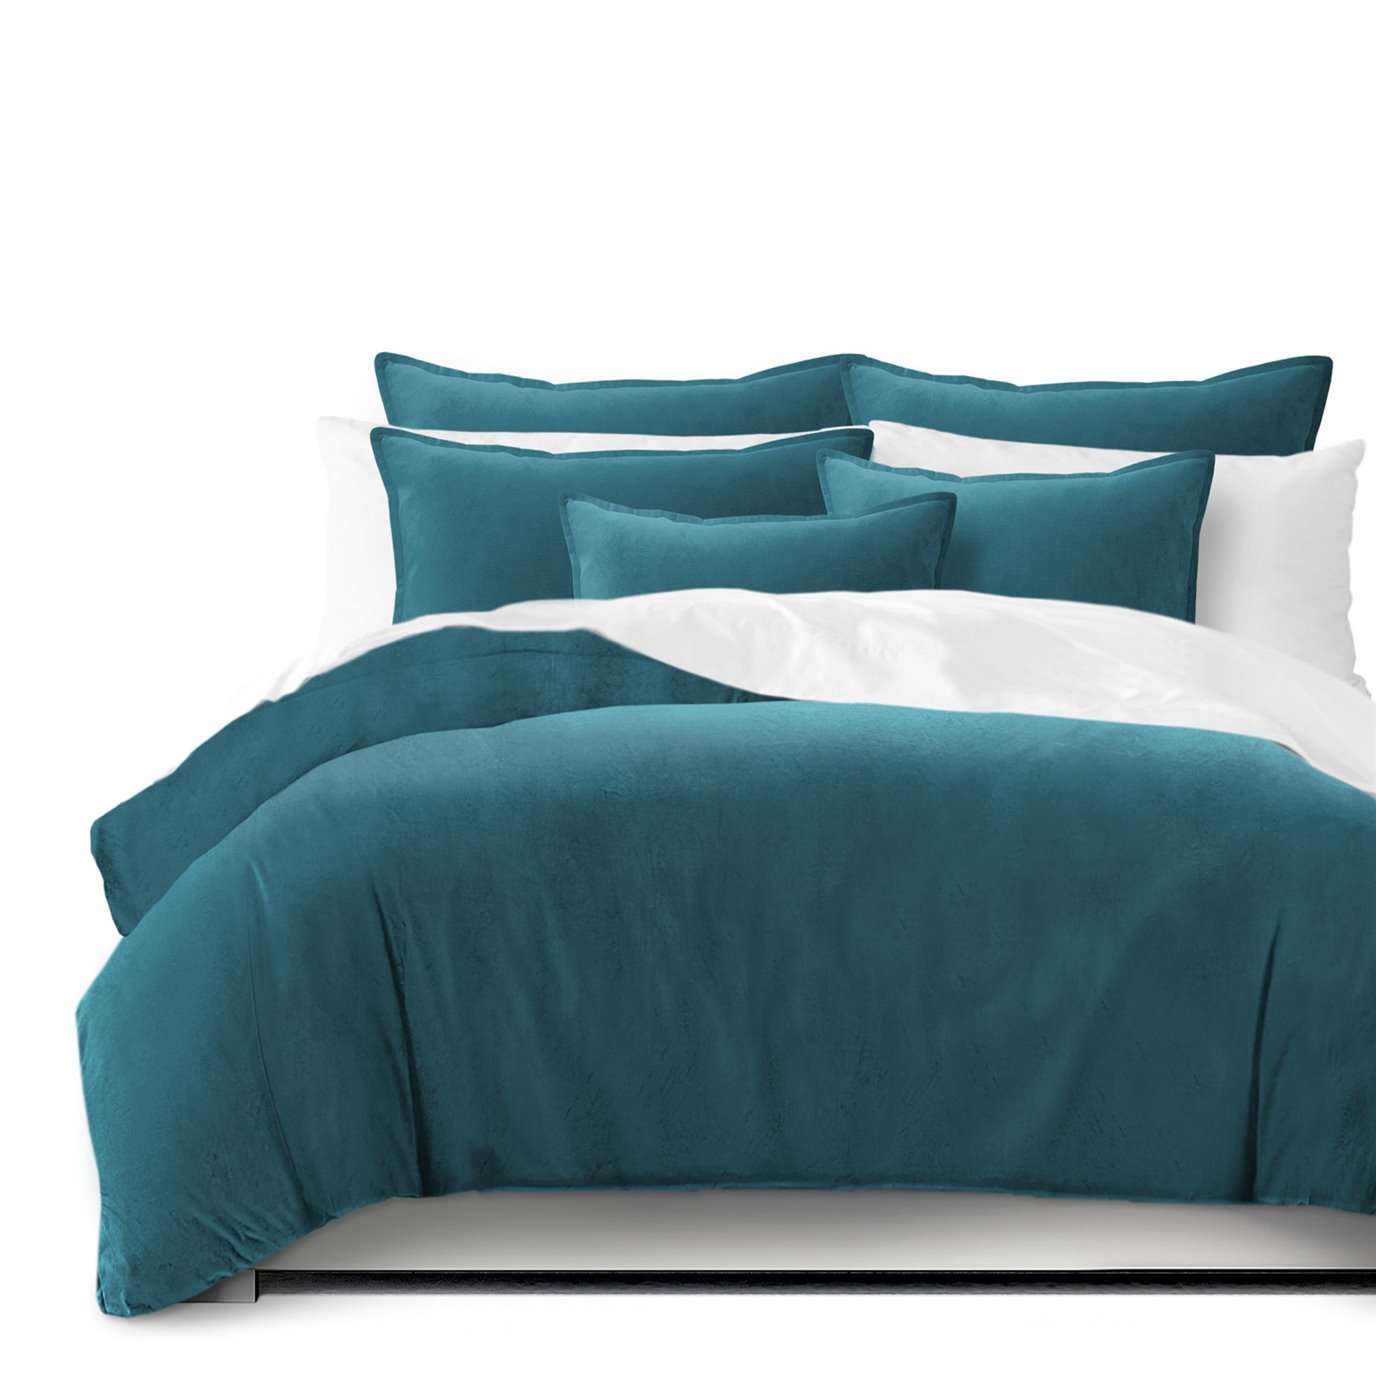 Vanessa Turquoise Comforter and Pillow Sham(s) Set - Size Twin